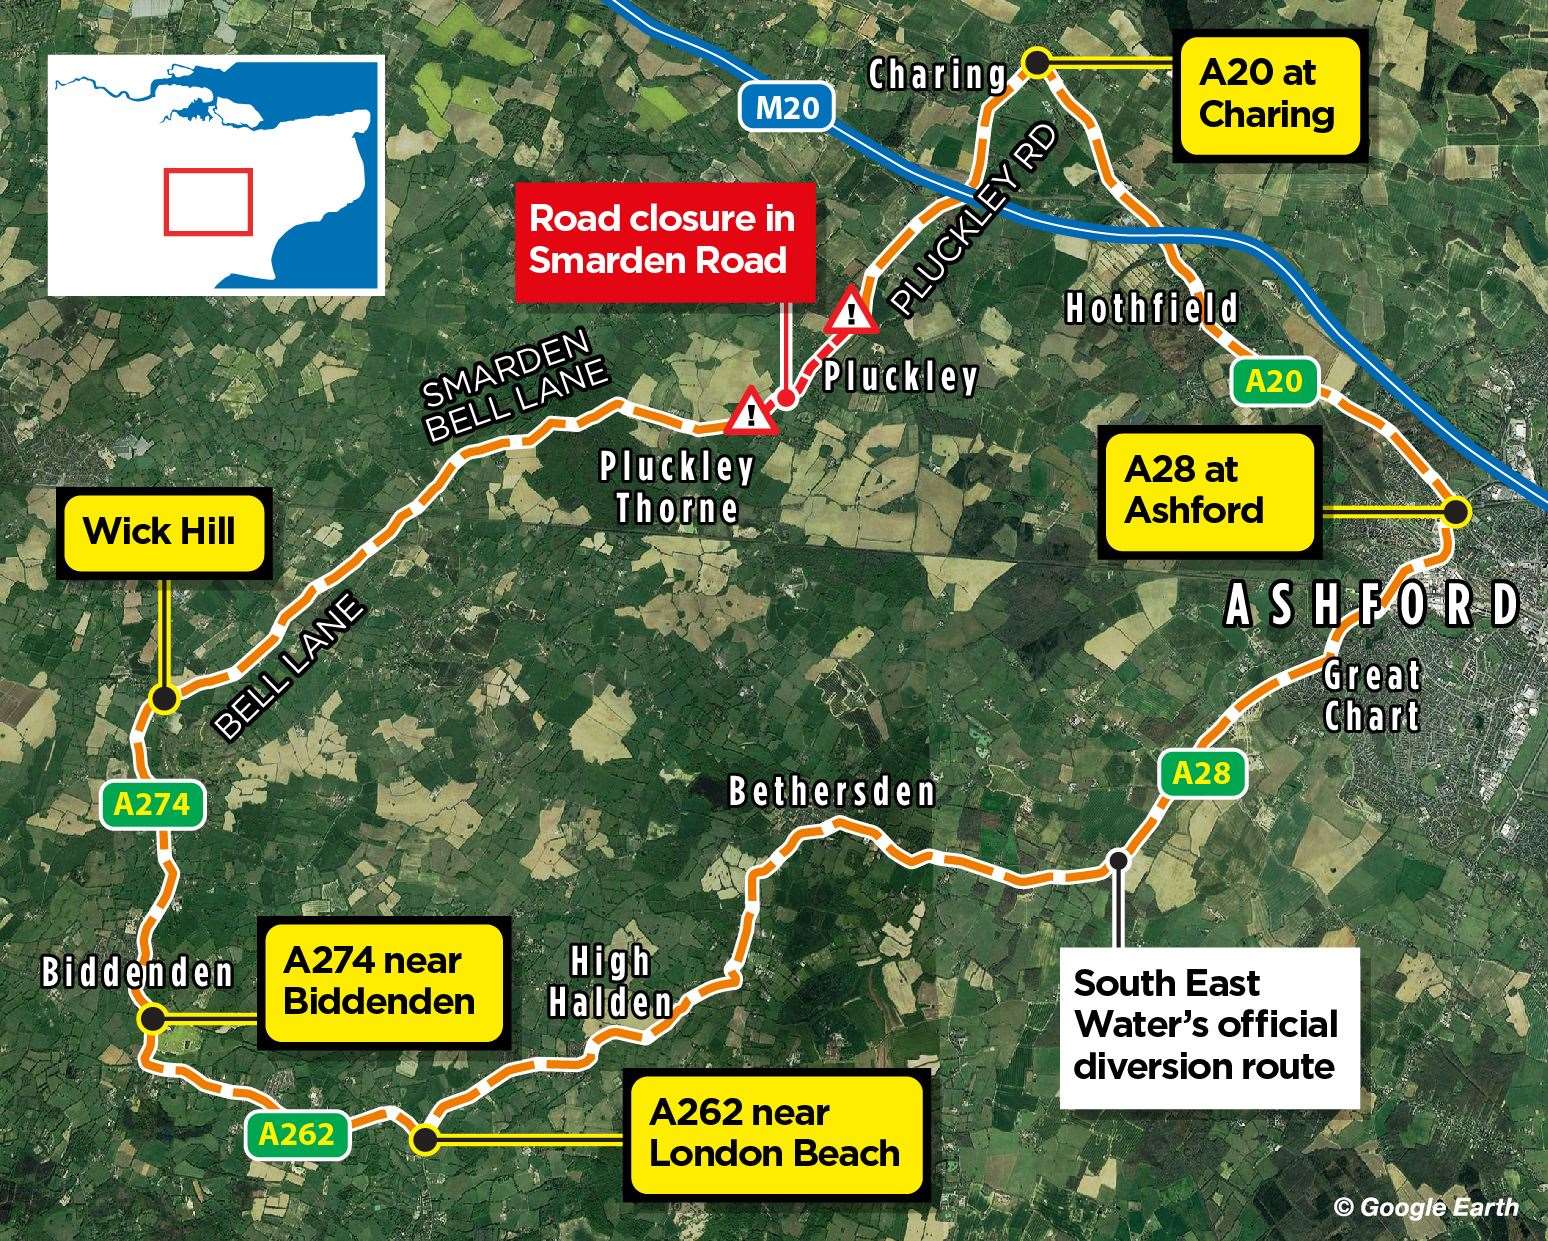 The diversion suggested by South East Water